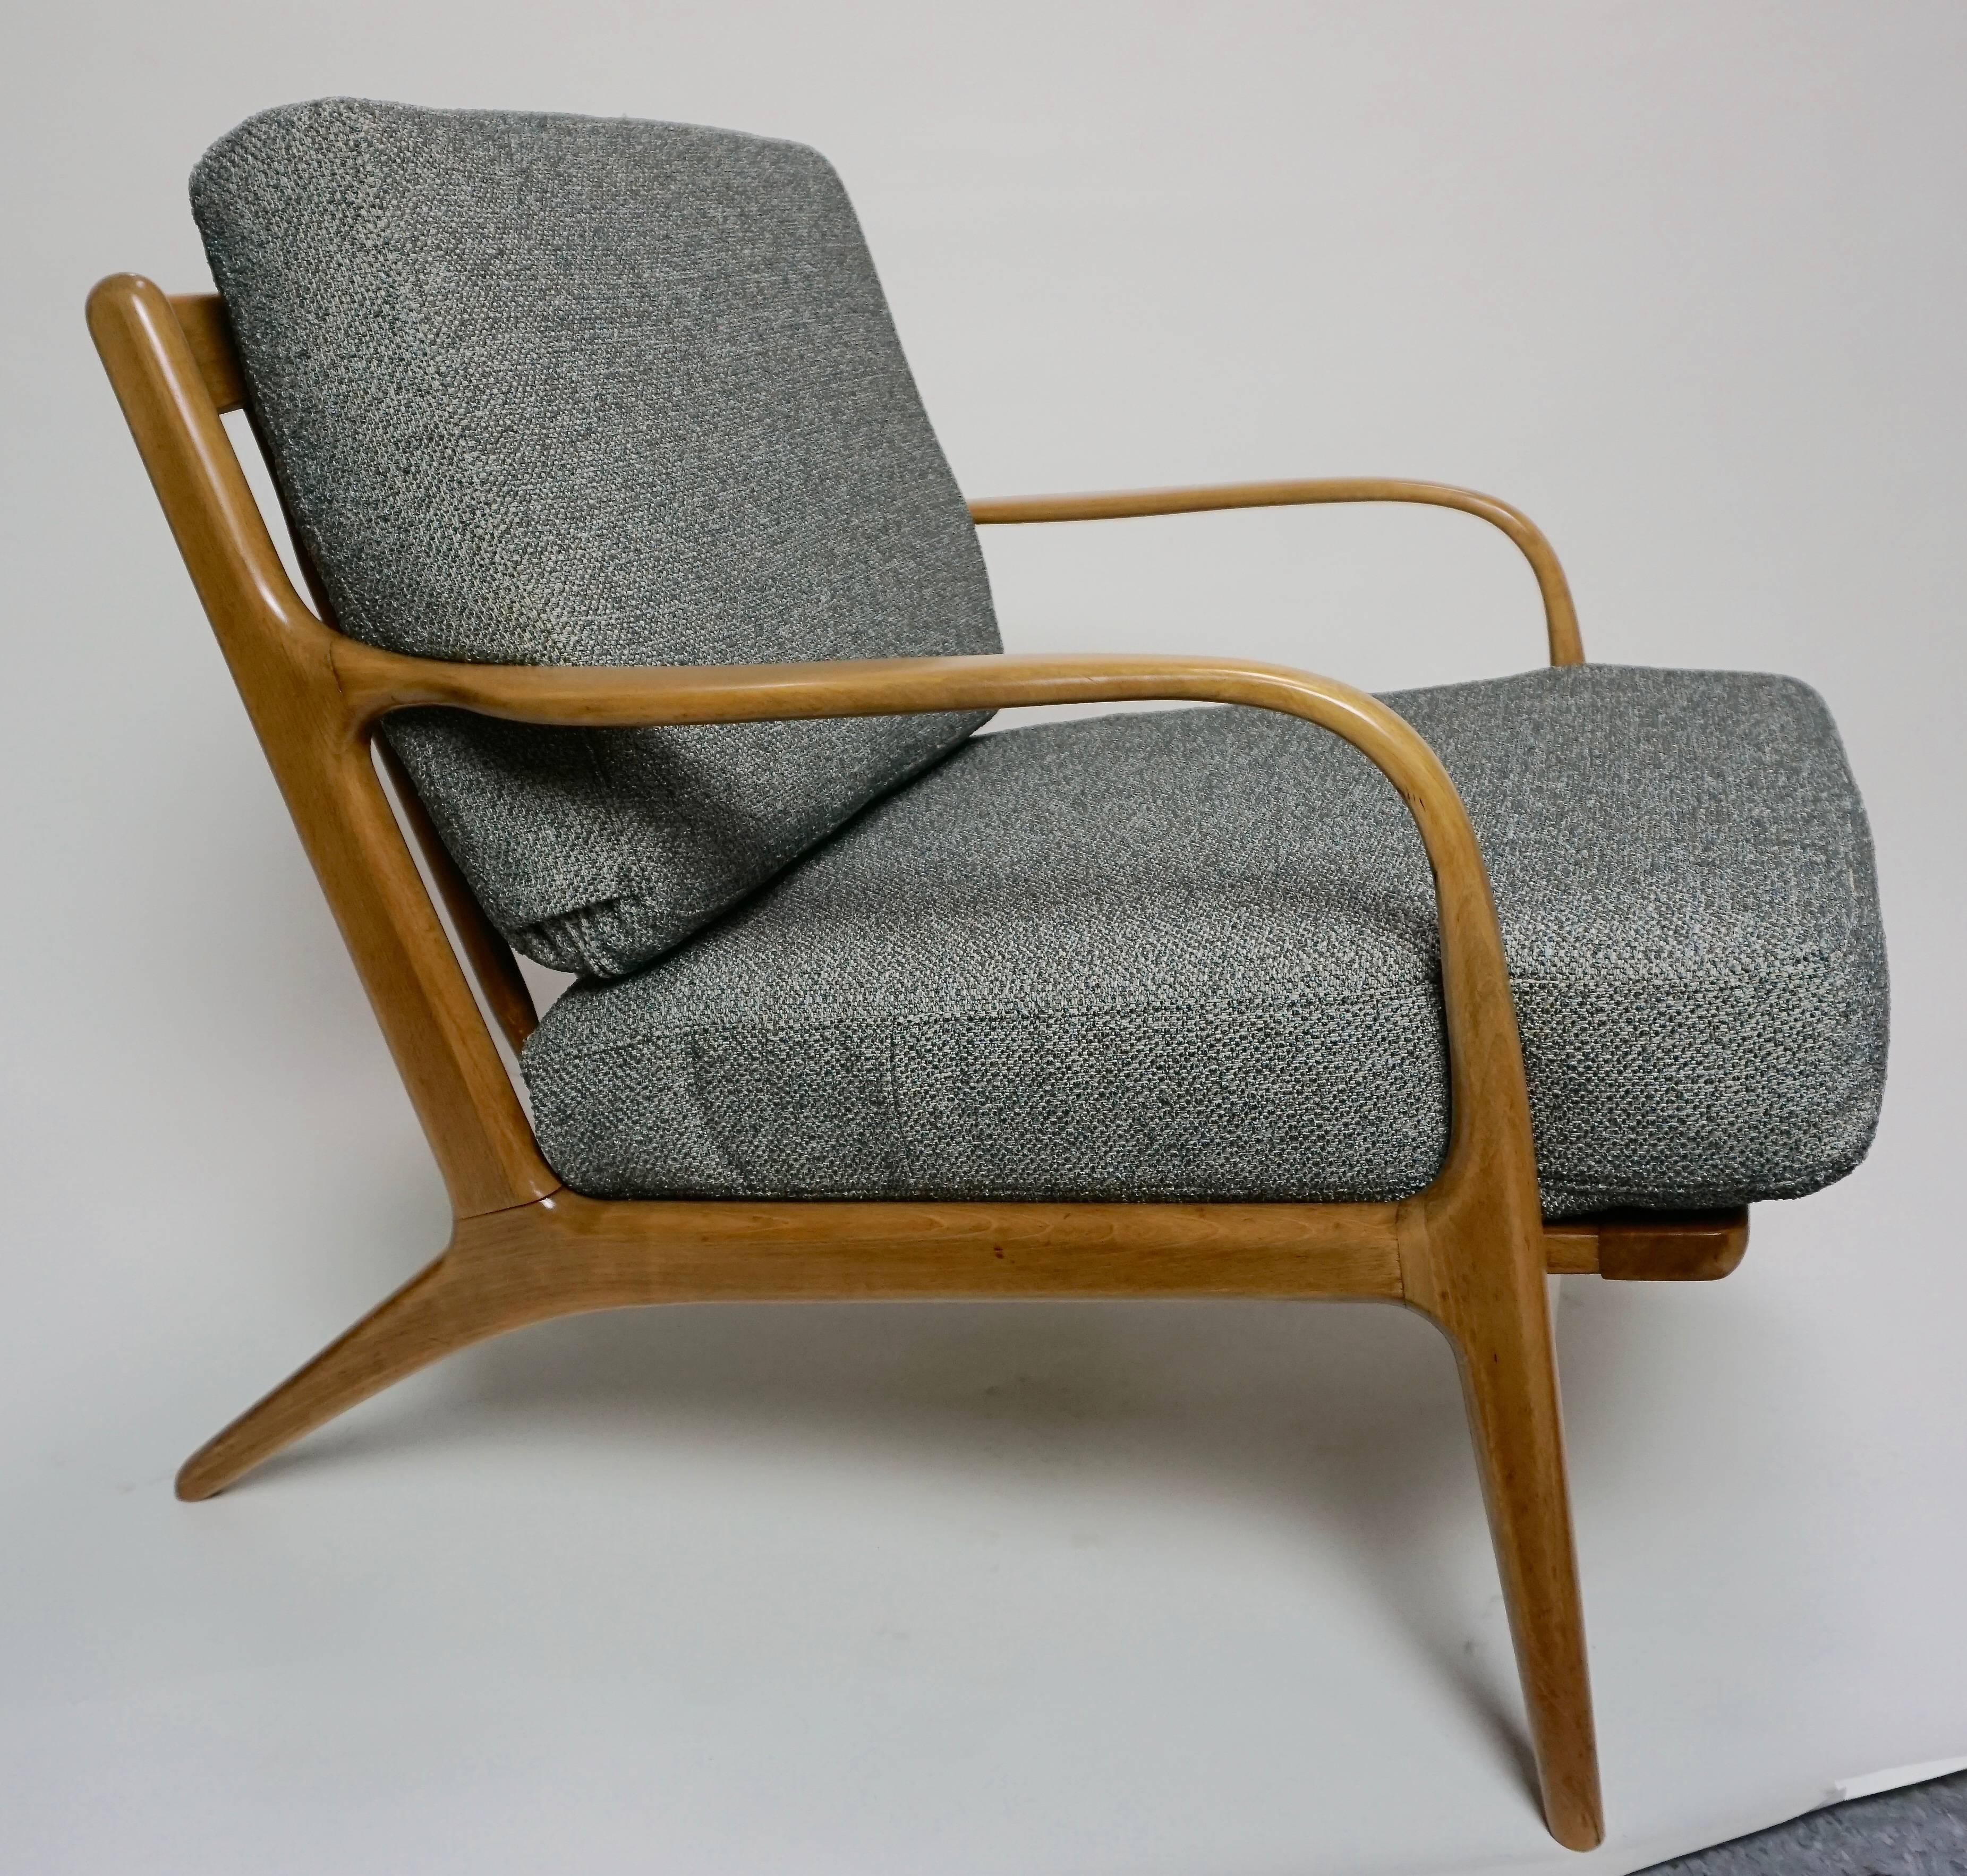 American 1960 Adrian Pearsall model 2315-c Bent Arm Lounge Chair-Pair